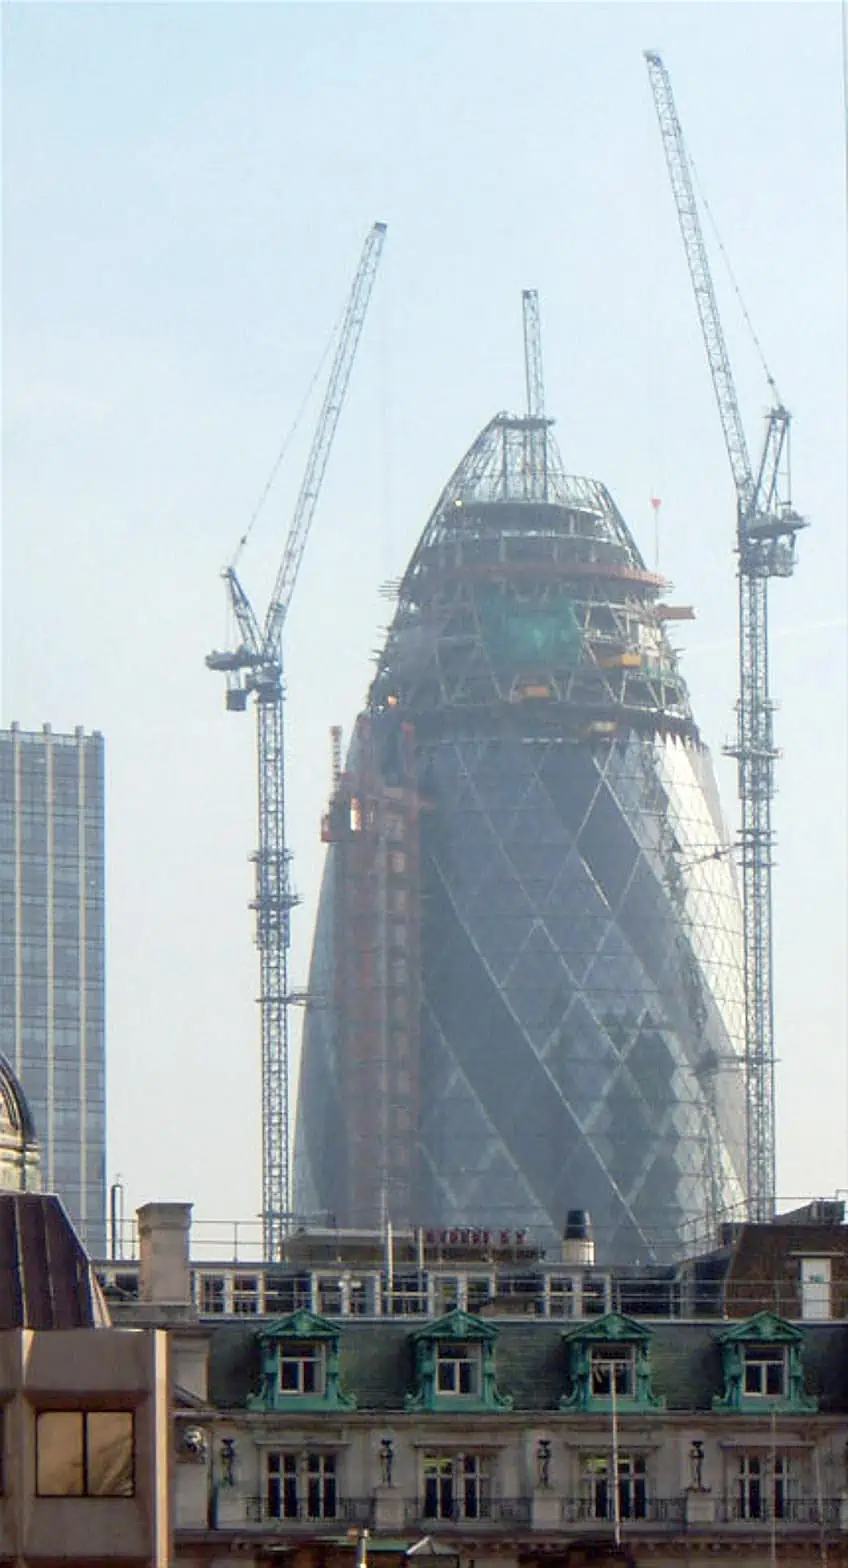 View the Gherkin Building